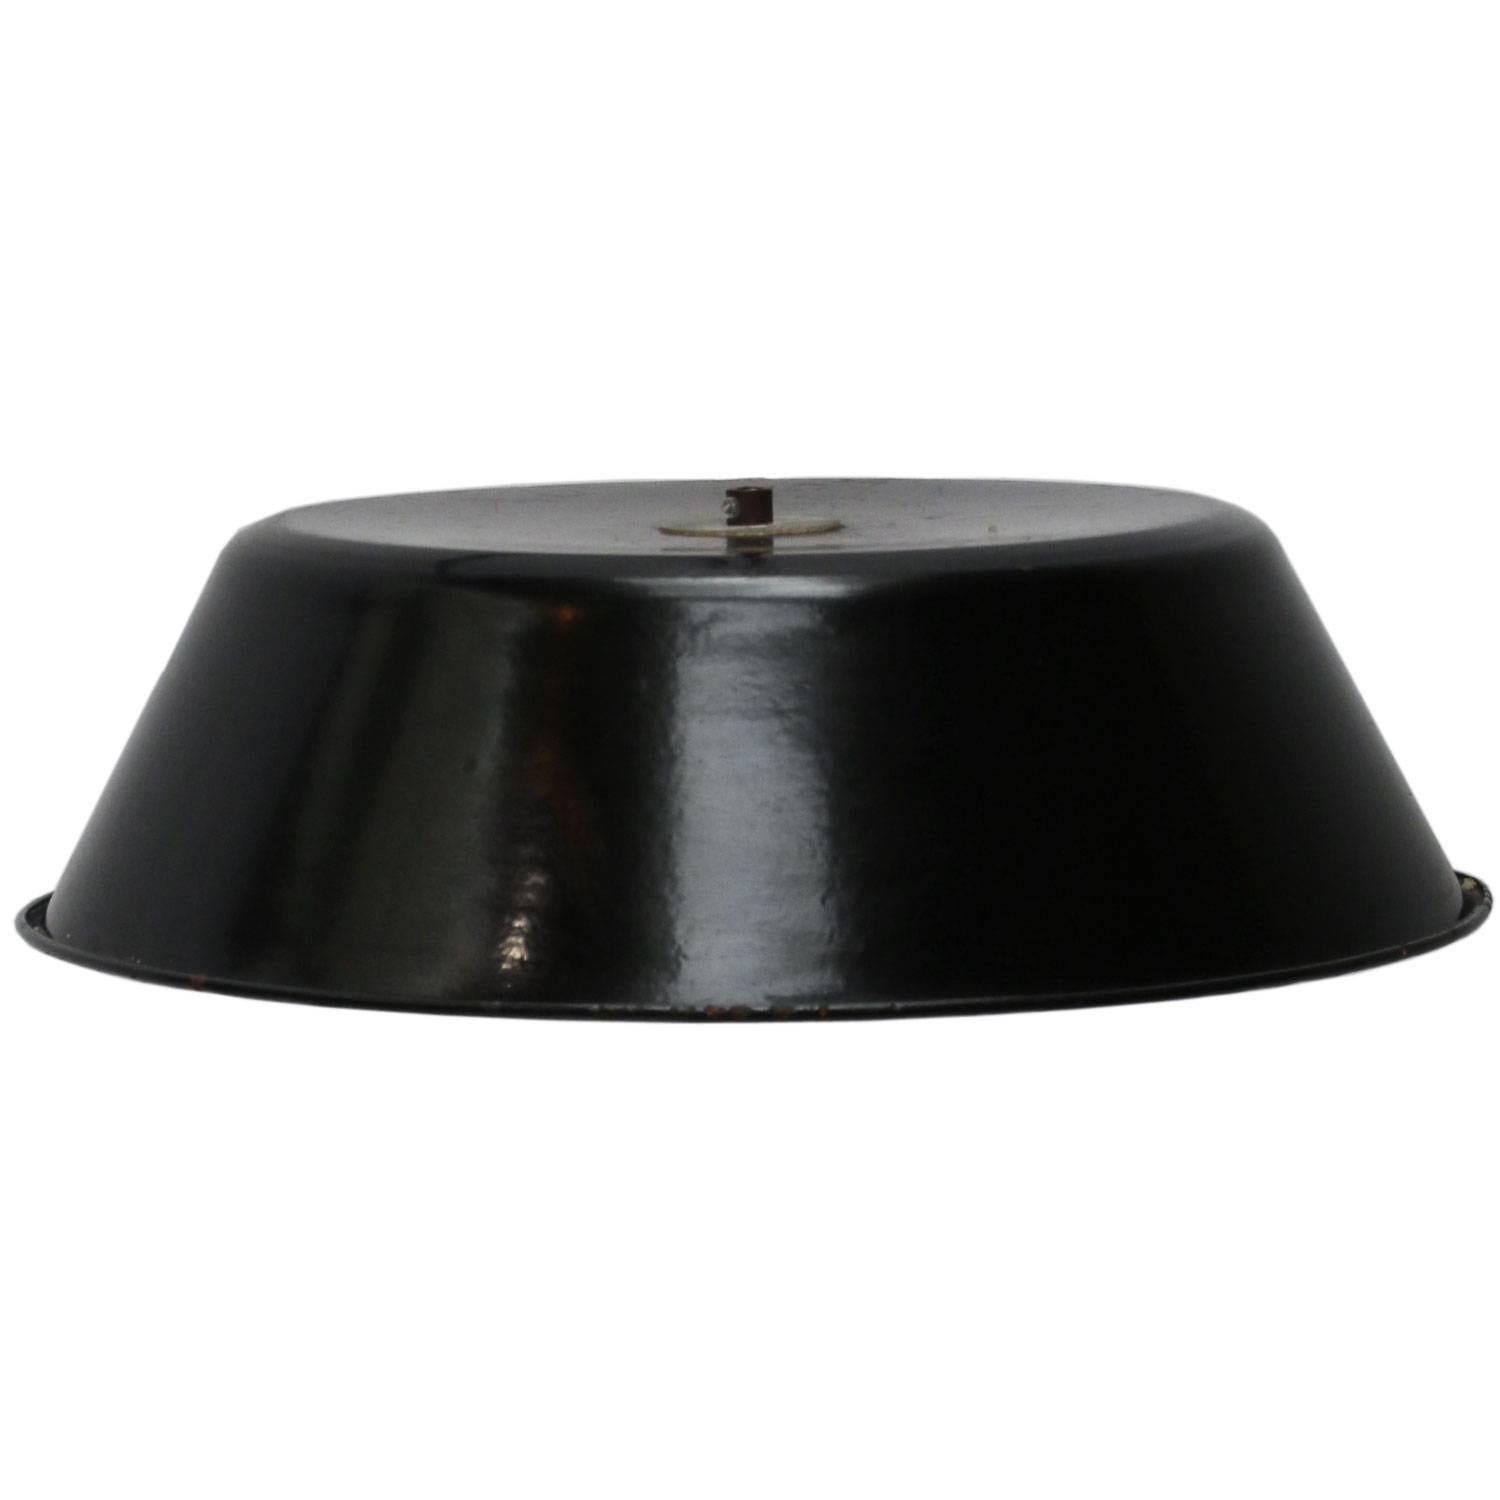 French Industrial pendant. Black enamel with white inside.

Measures: Weight 1.2 kg / 2.6 lb

Priced per individual item. All lamps have been made suitable by international standards for incandescent light bulbs, energy-efficient and LED bulbs.